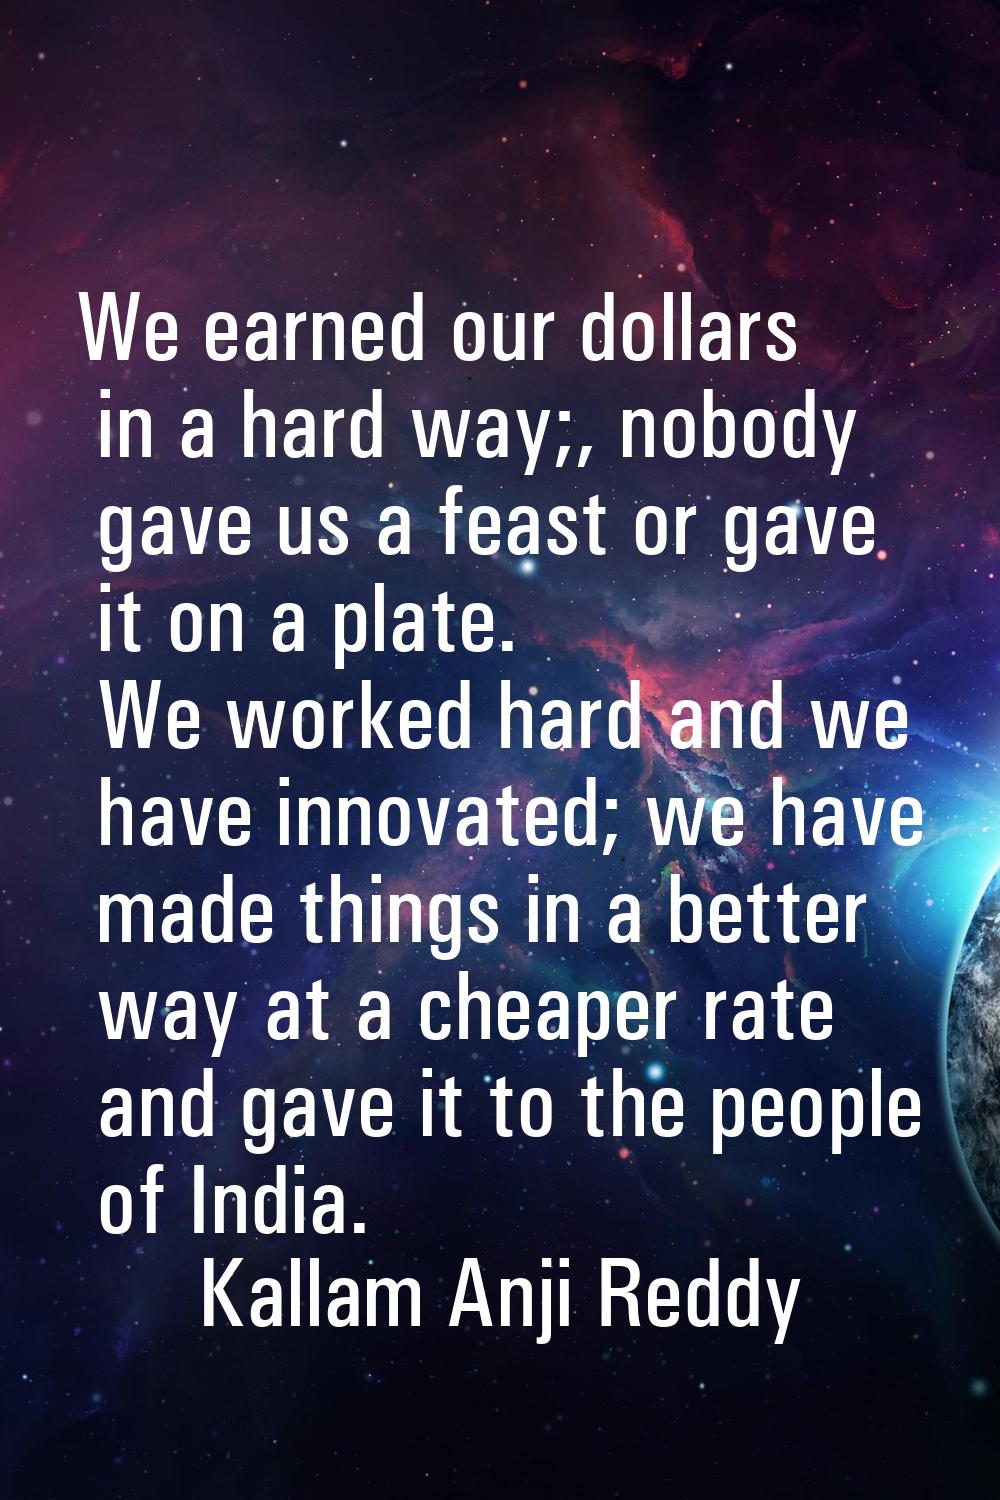 We earned our dollars in a hard way;, nobody gave us a feast or gave it on a plate. We worked hard 